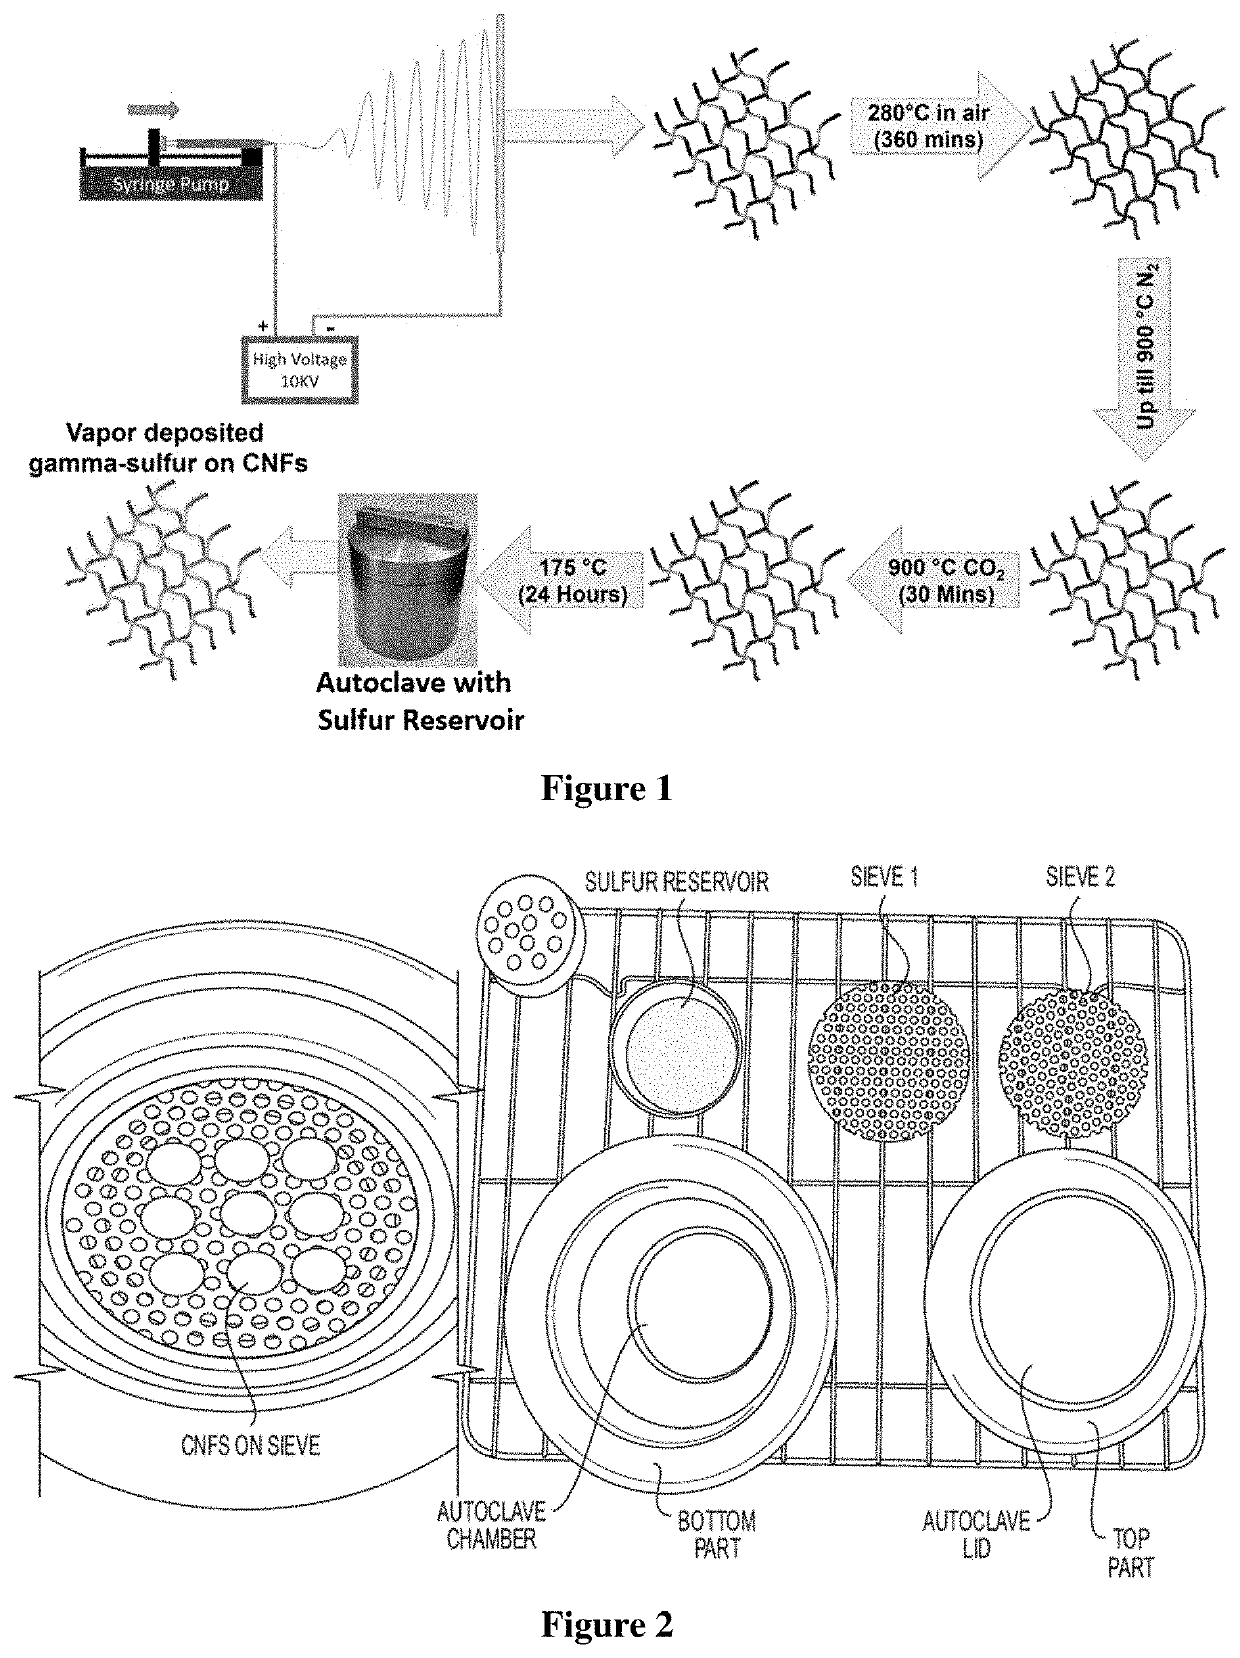 Synthesis of gamma monoclinic sulfur and sulfur batteries containing monoclinic sulfur